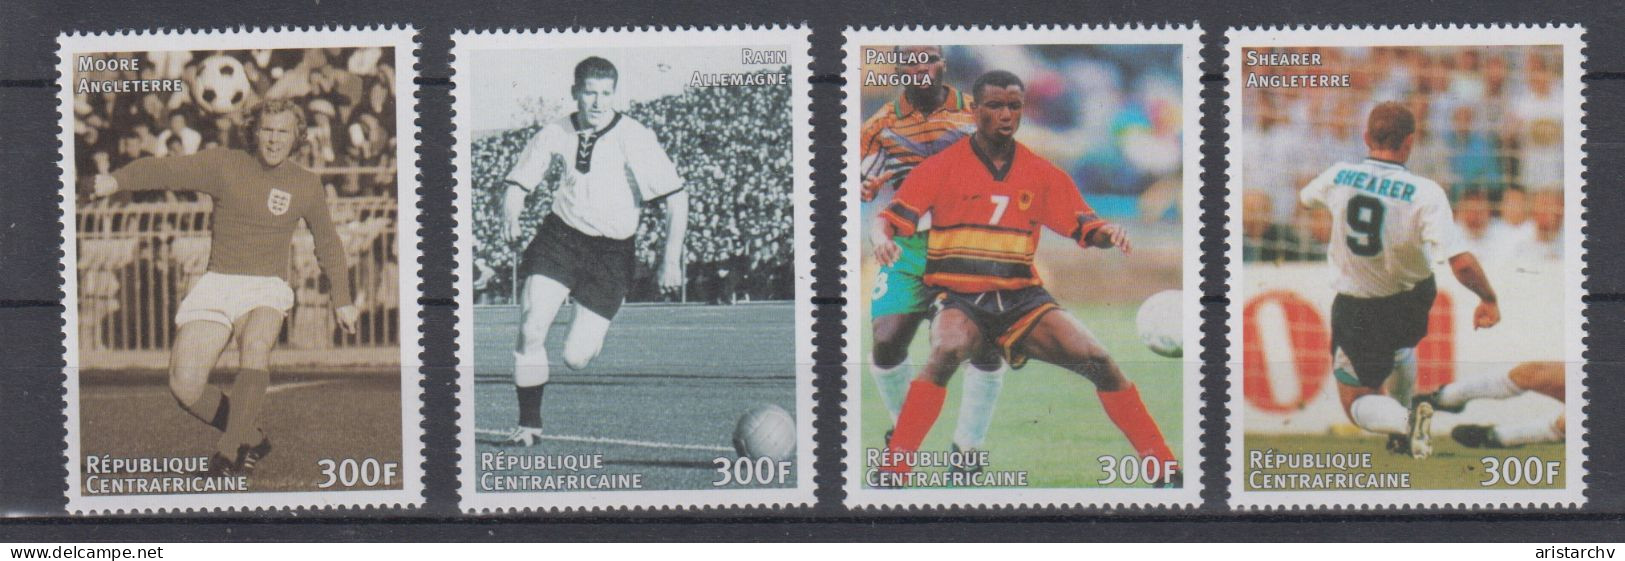 CENTRAL AFRICAN REPUBLIC 1998 FOOTBALL WORLD CUP 2 S/SHEETS SHEETLET AND 4 STAMPS - 1998 – France